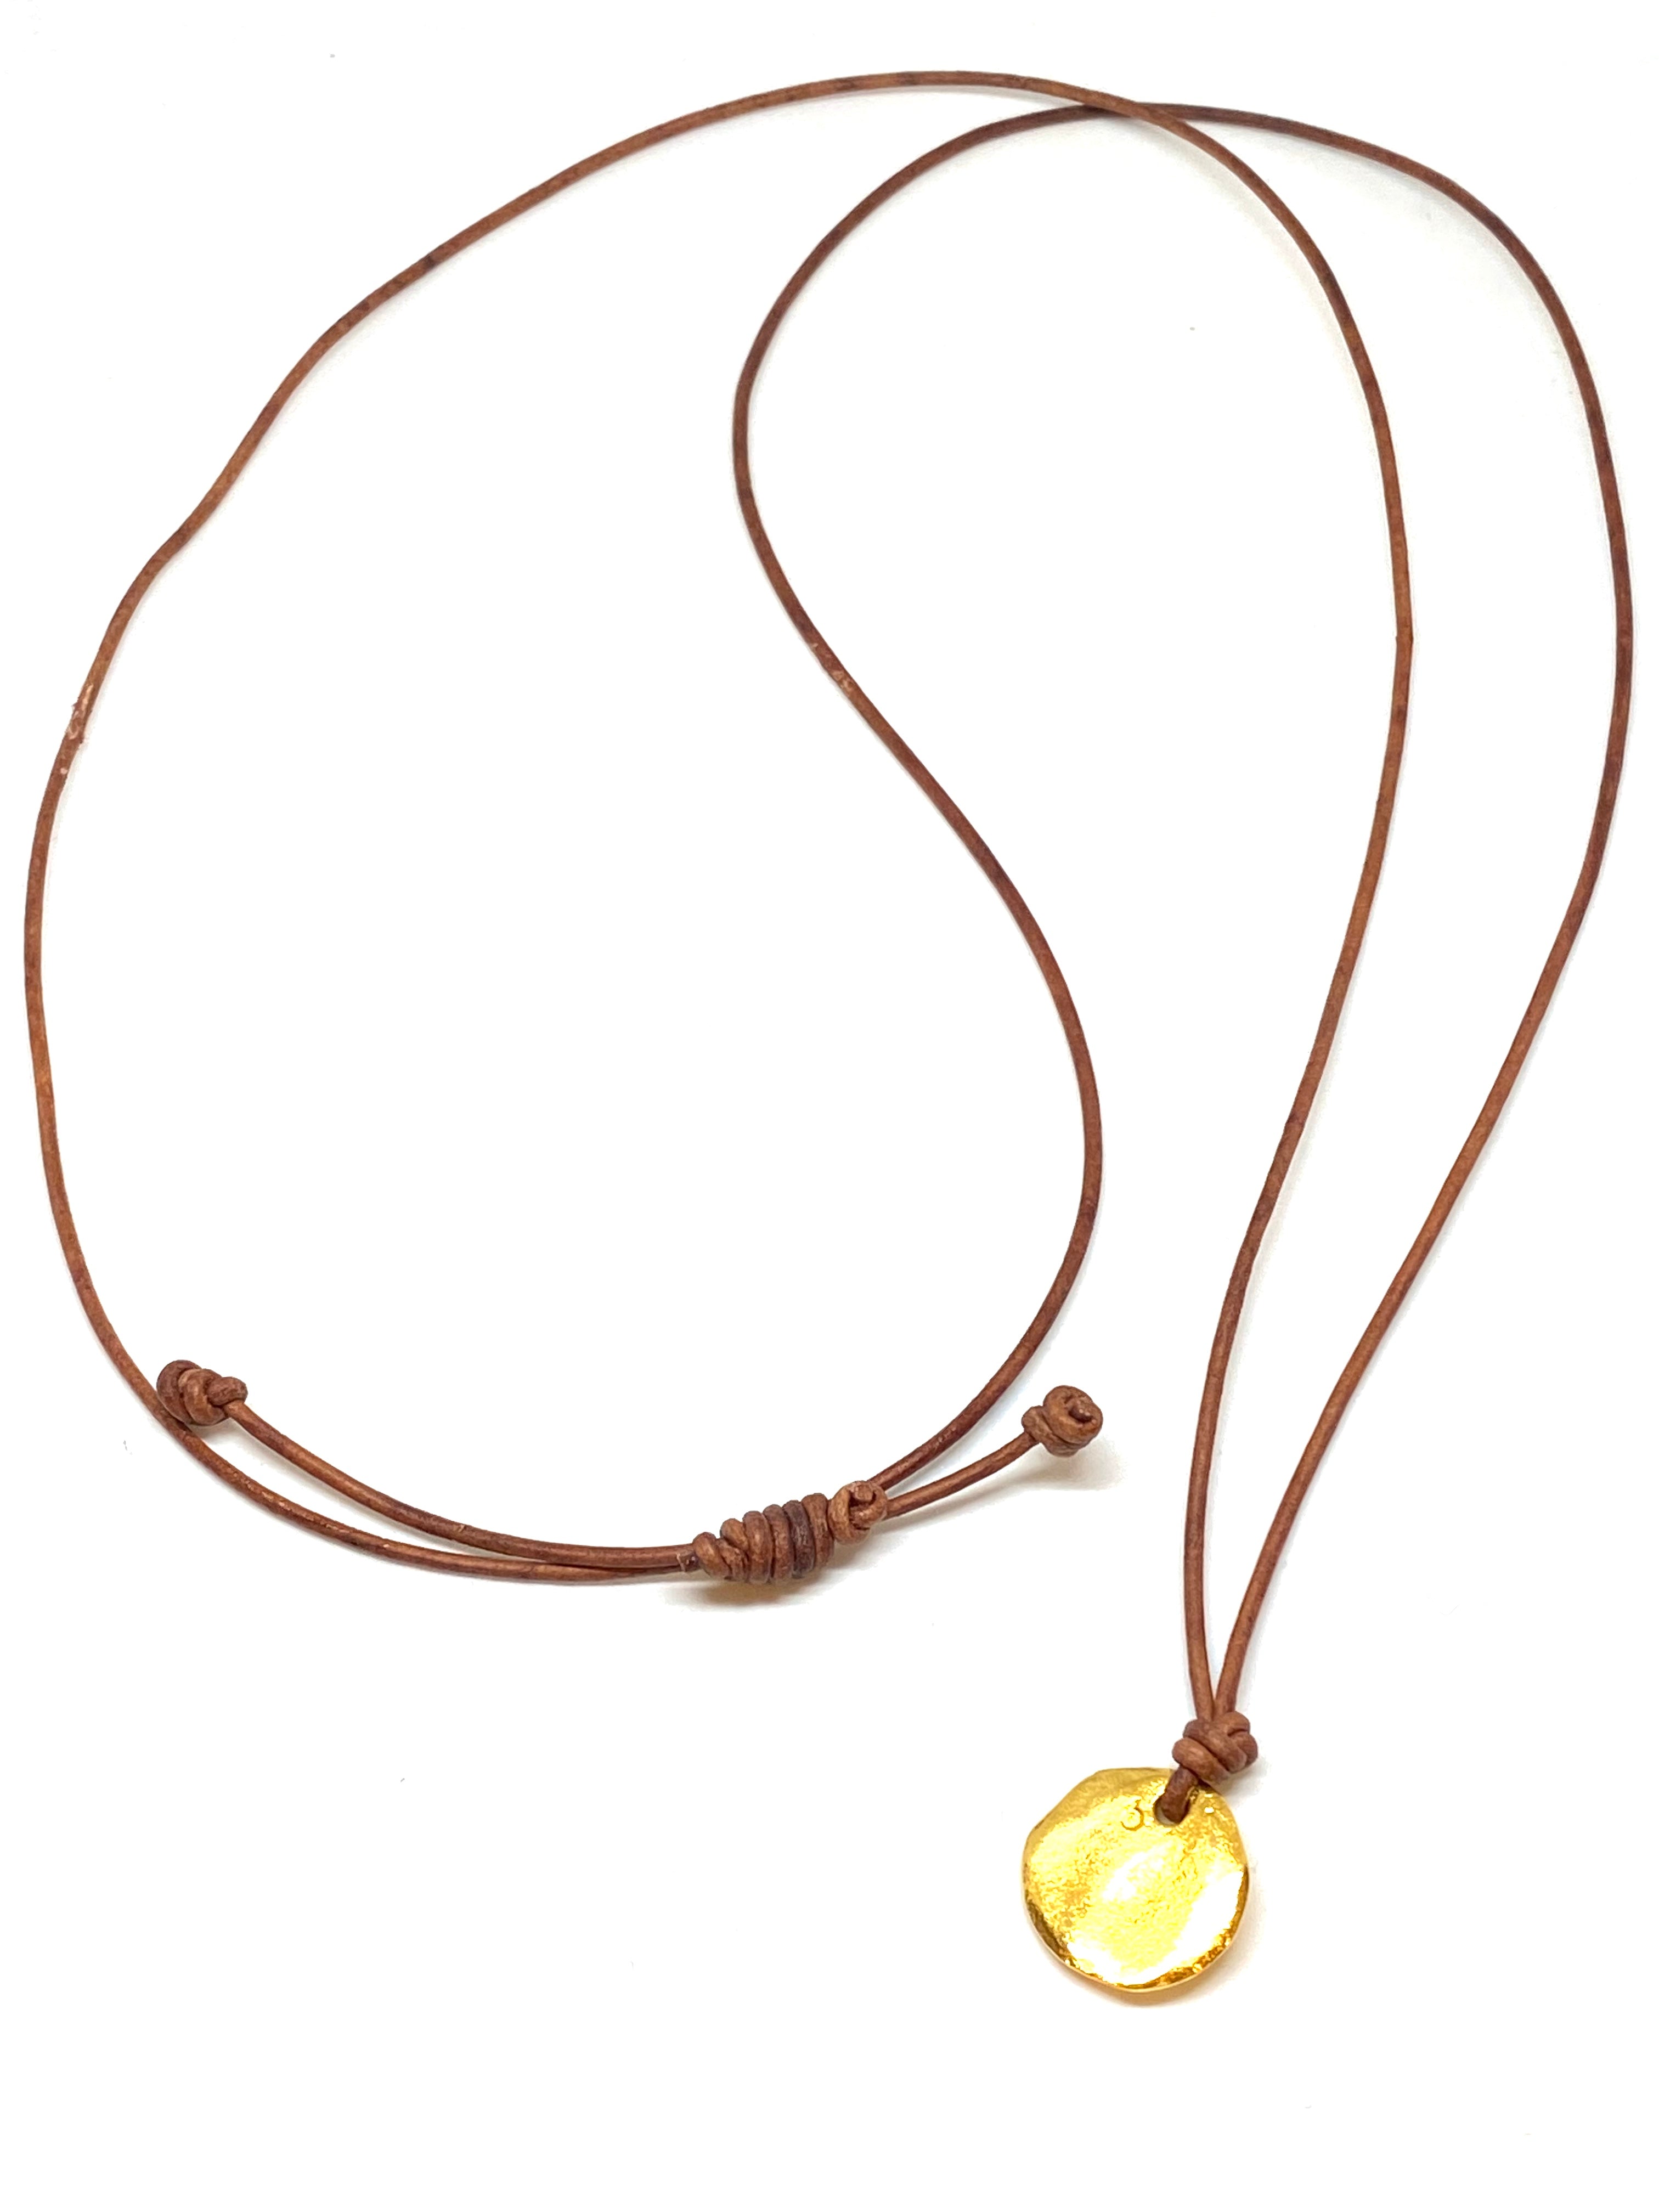 Necklace with Gold Charm